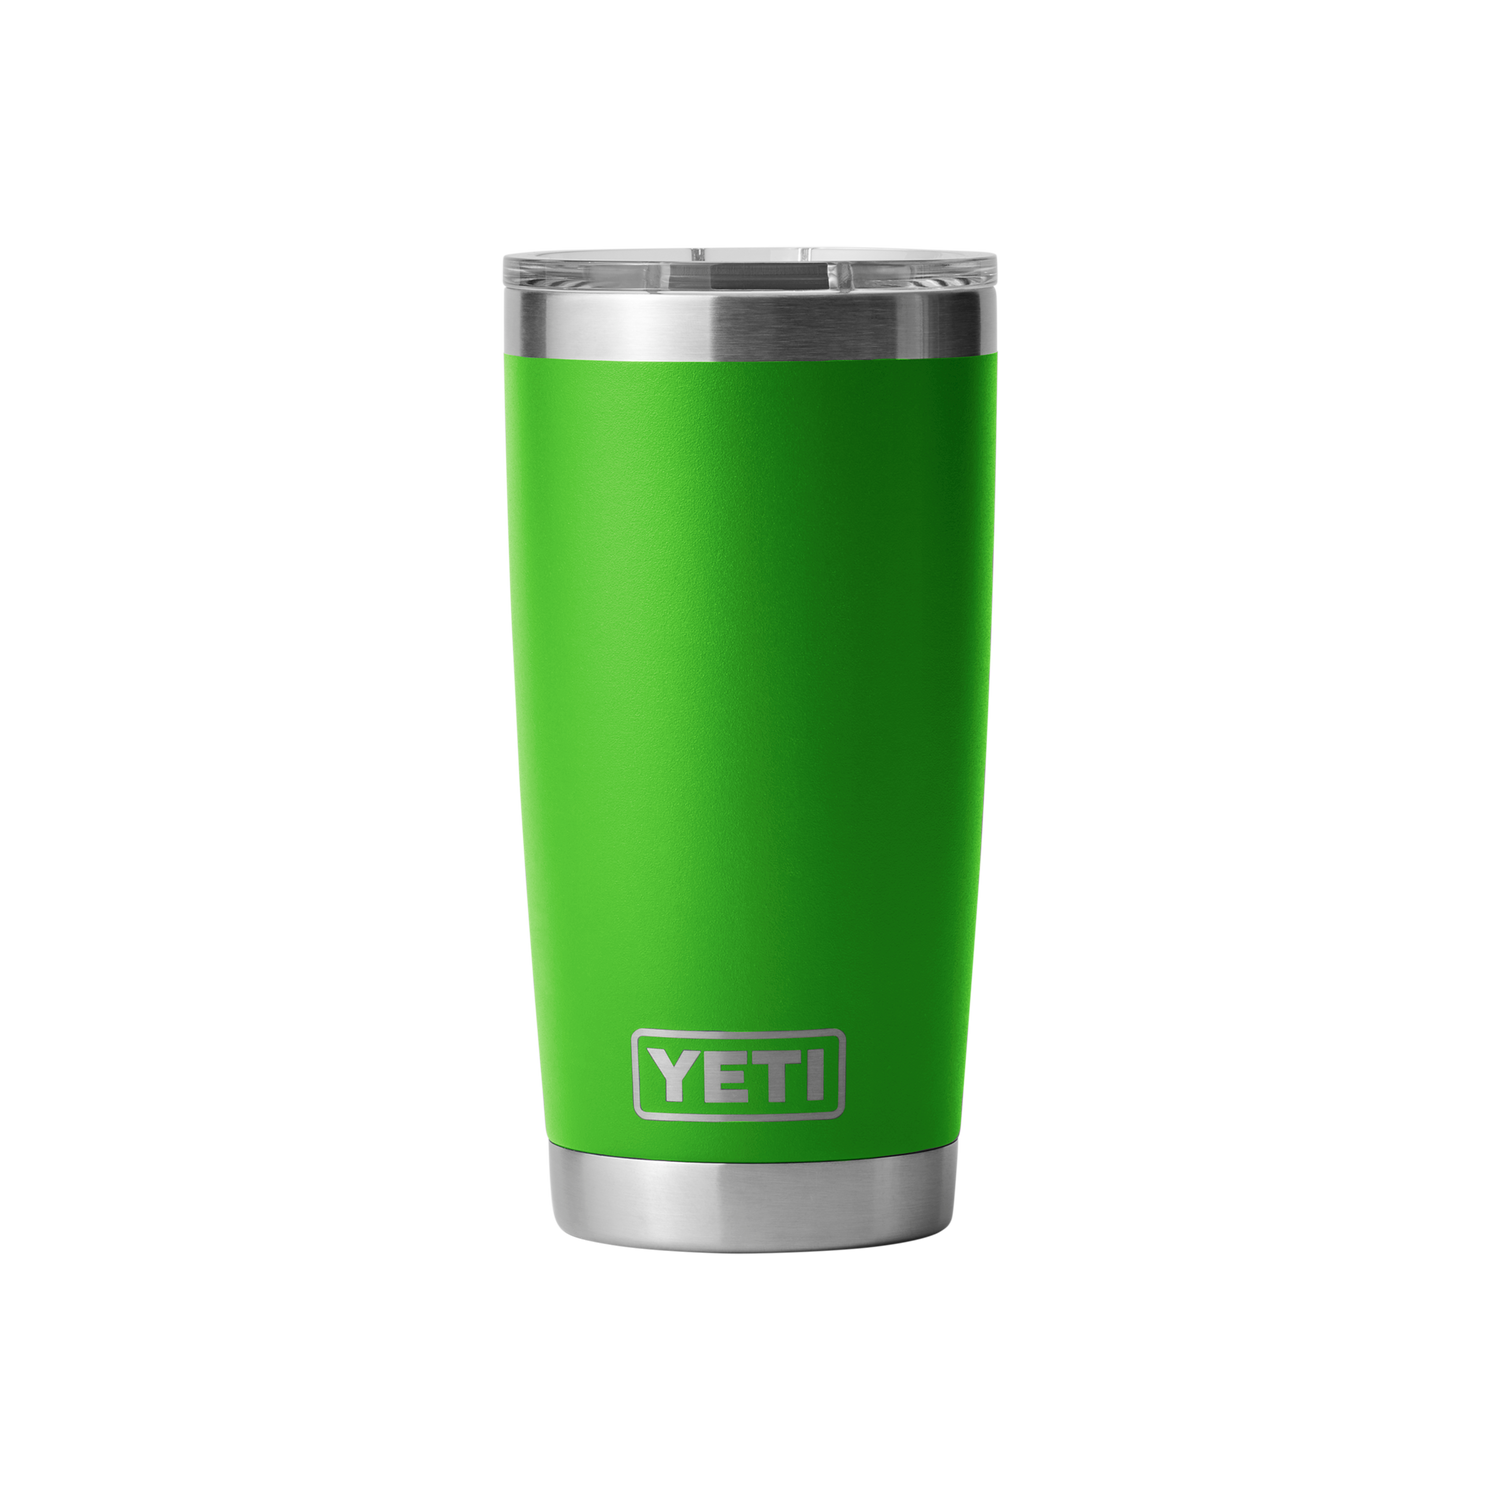 Yeti harvest Red 16oz Pint Stackable Tumbler Rambler Rare Limited Color NEW